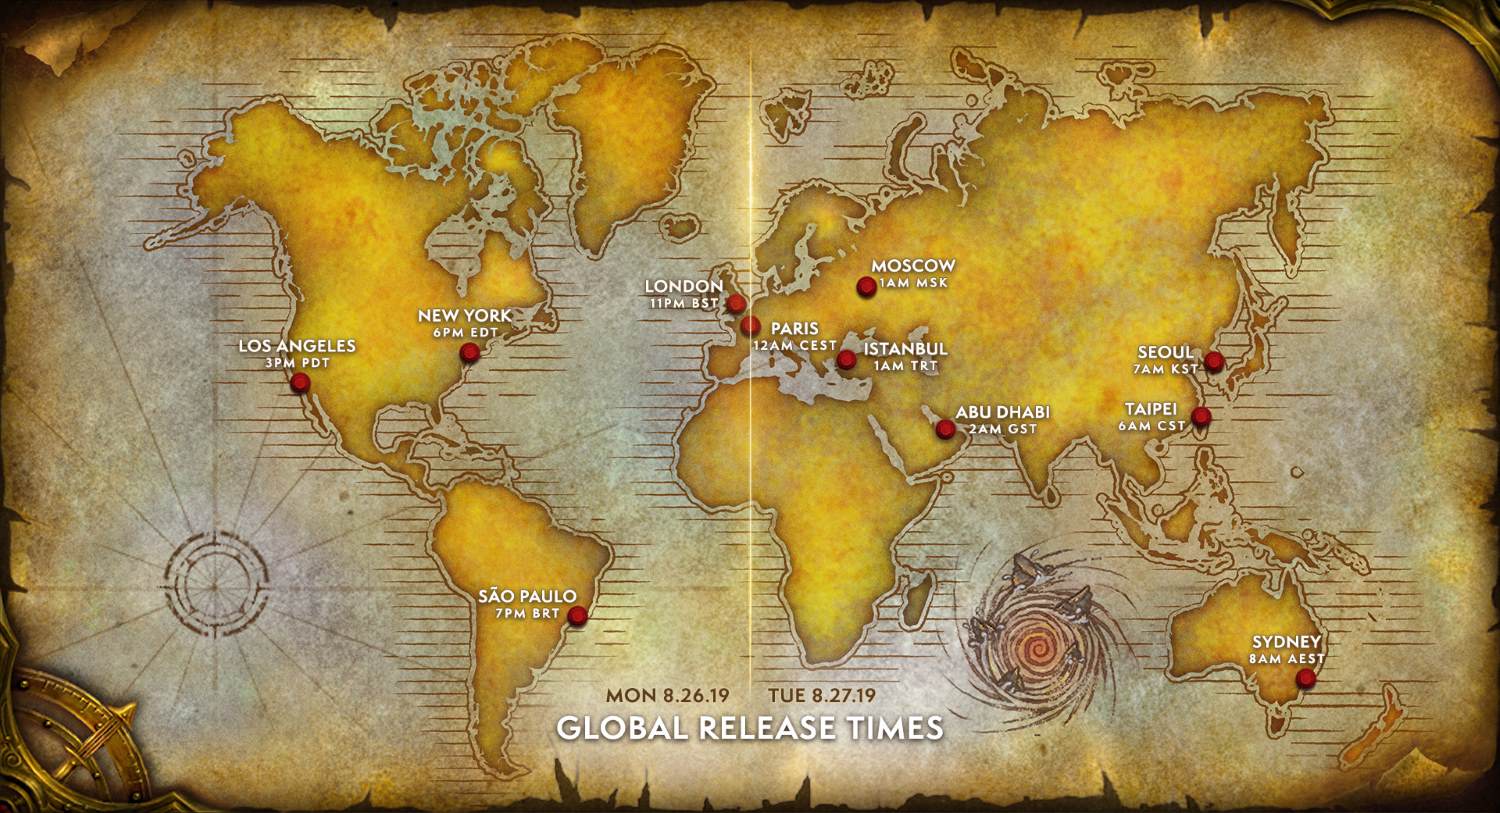 WoW Classic Global Release Map